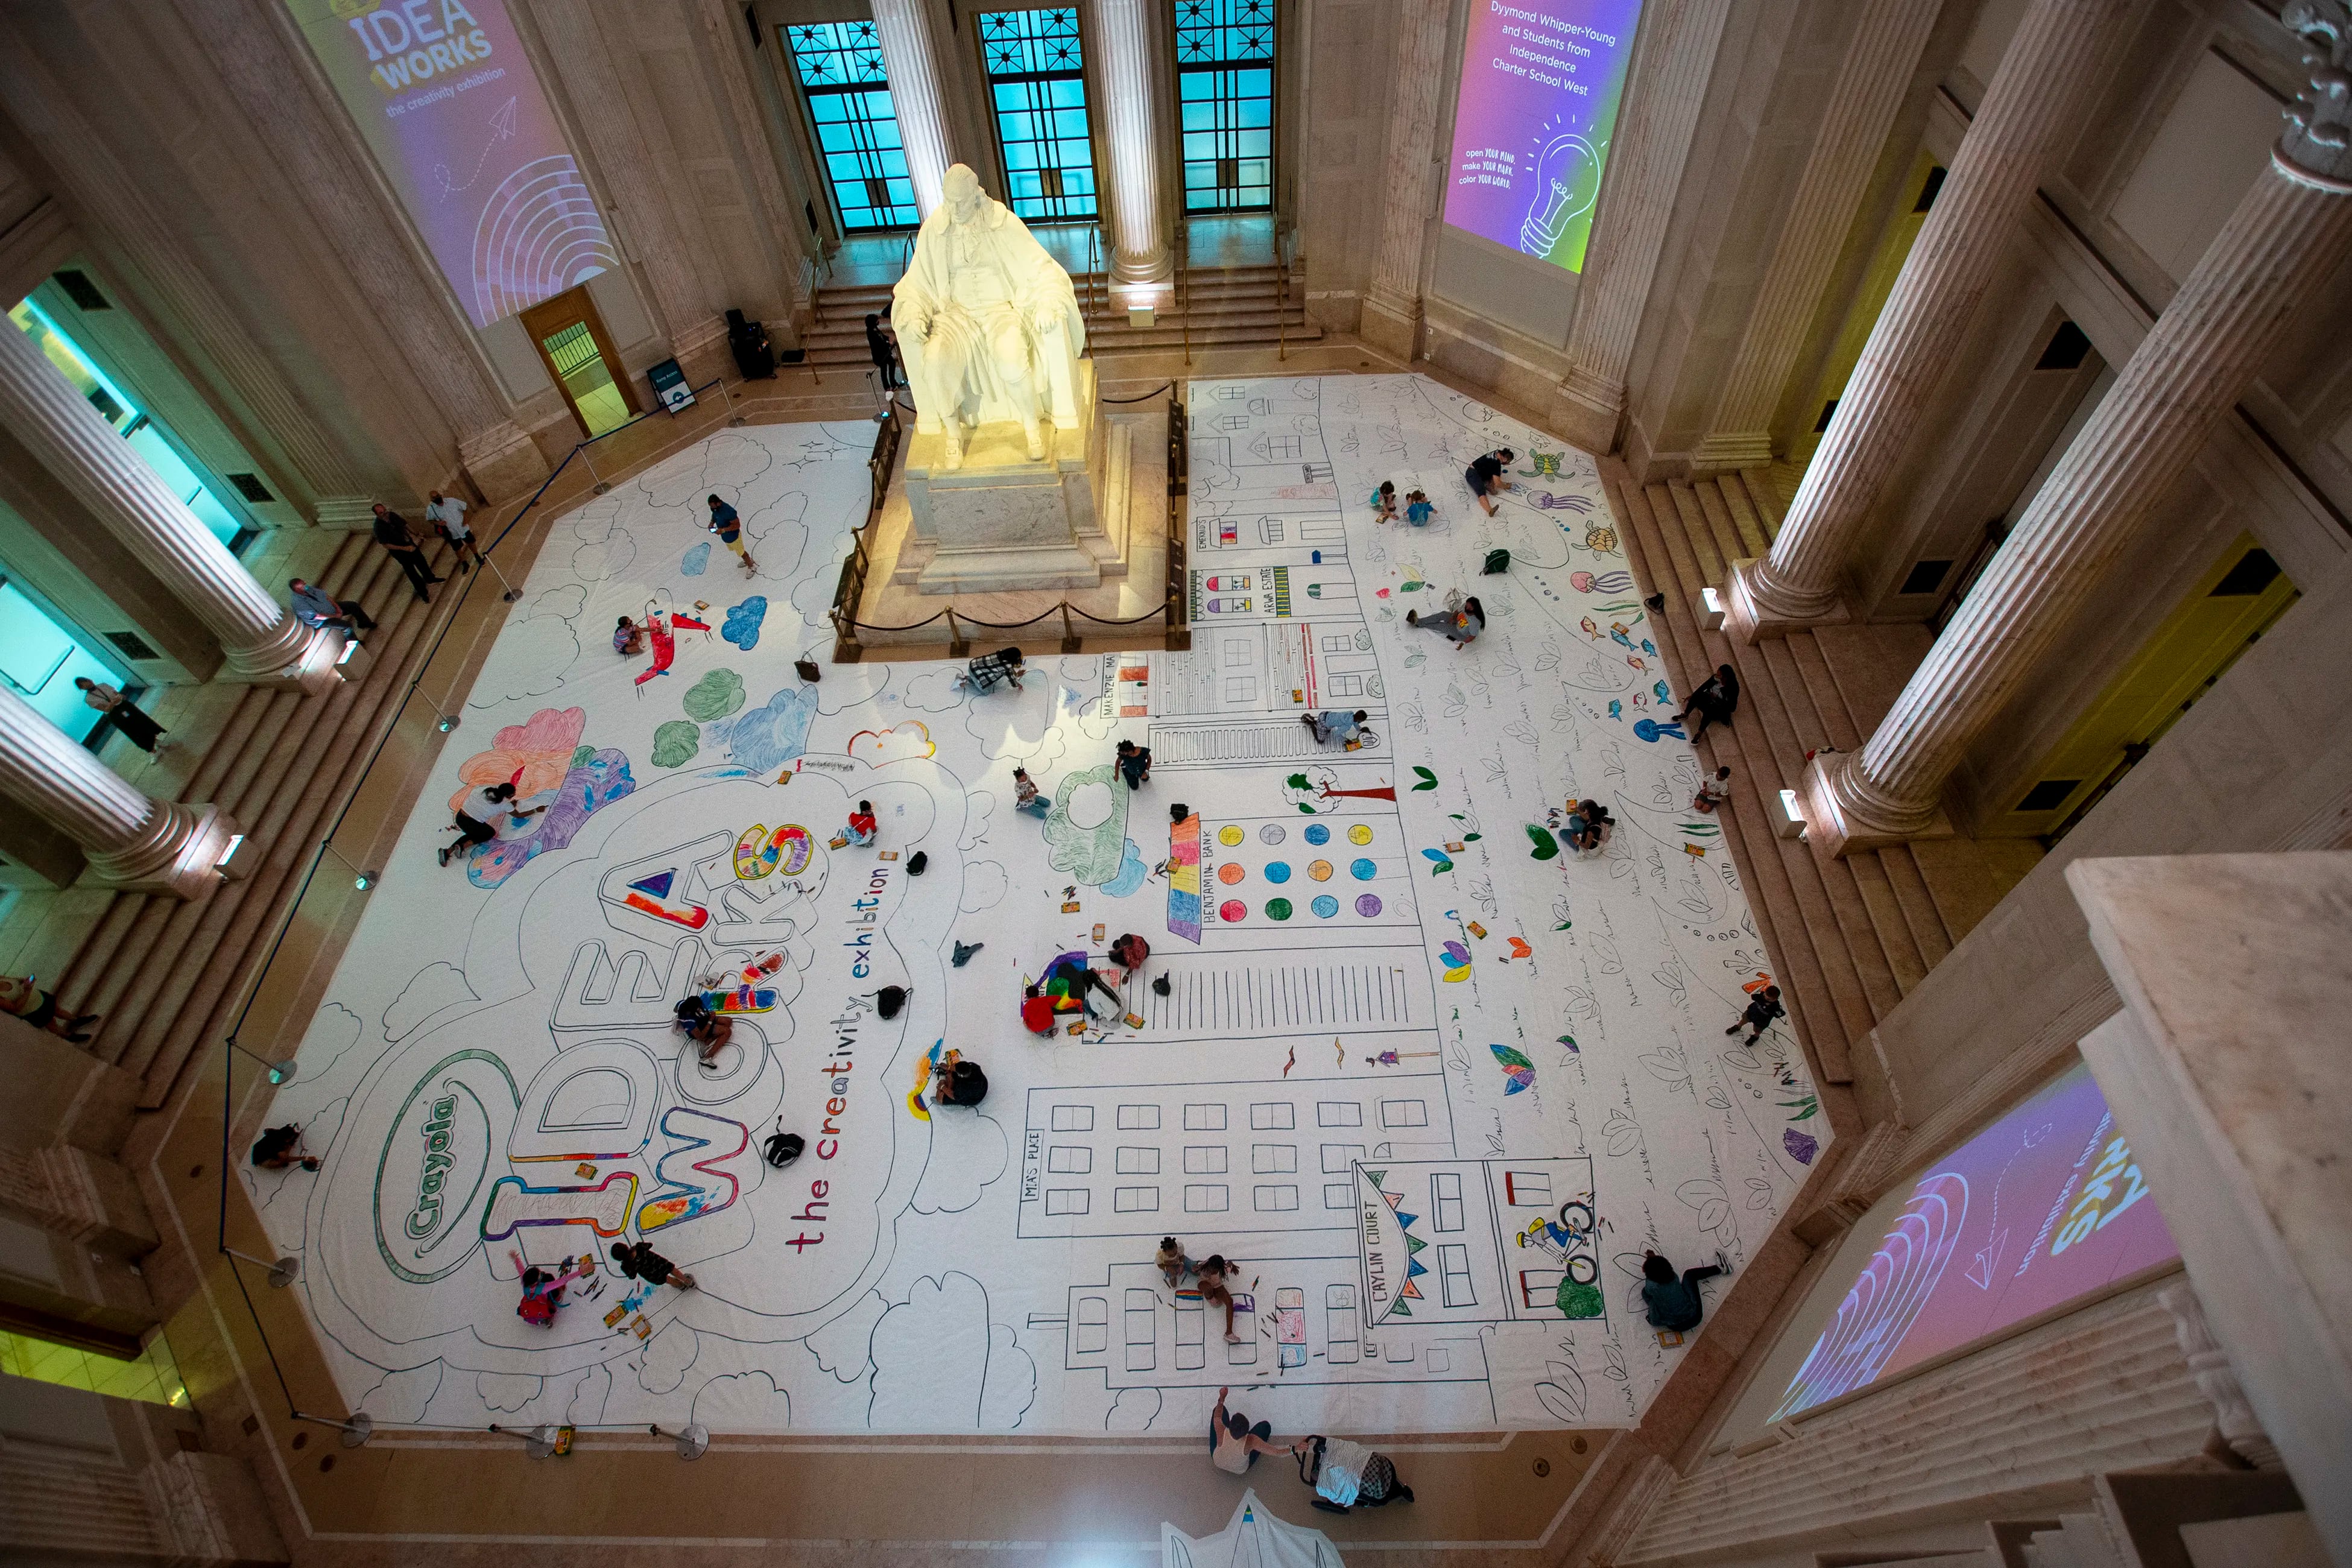 Part of the Franklin Institute's exhibit "Crayola IDEAworks: The Creativity Exhibition" where students from Independence Charter School West colored in a portion of the 6,500 square foot drawing created by their art teacher Dyymond Whipper-Young.